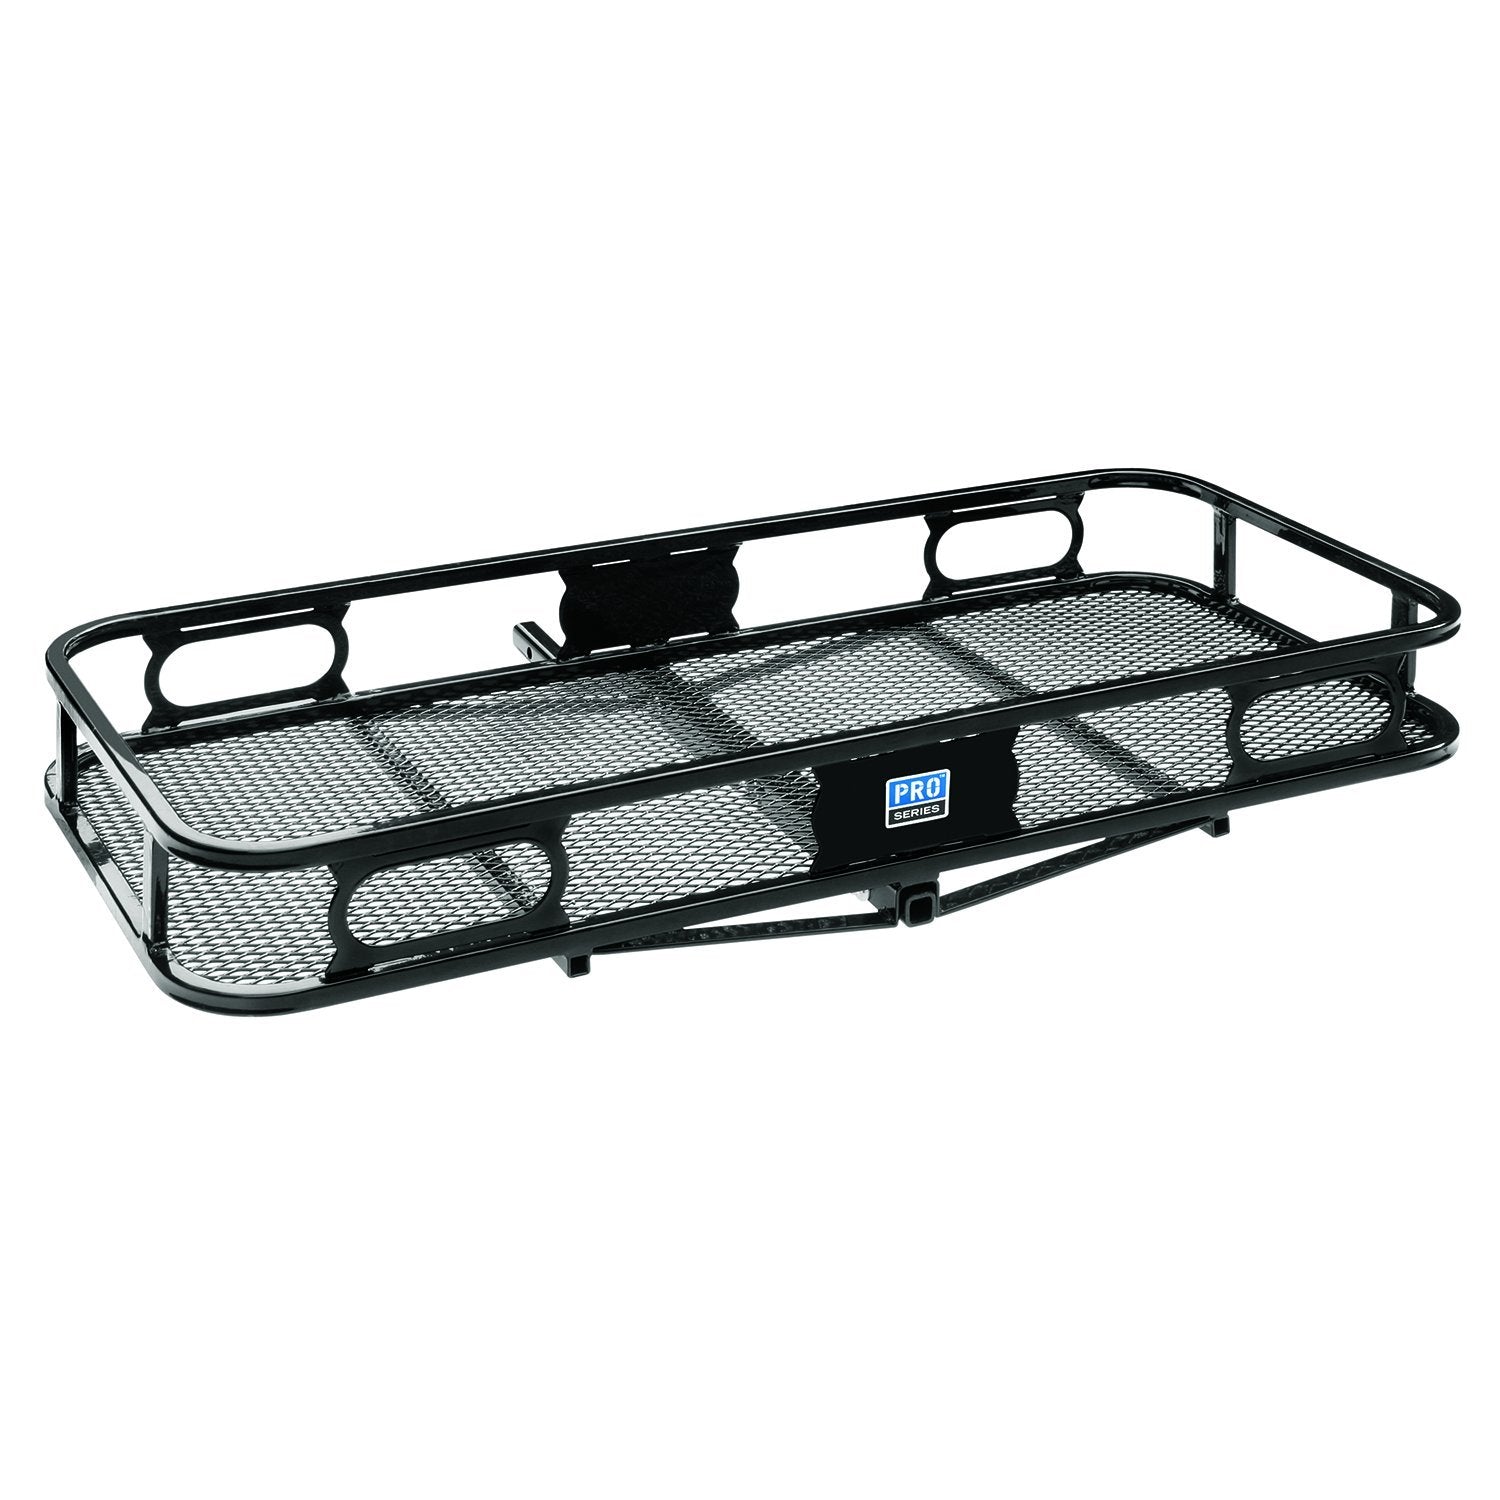 Pro Series 63154 Rambler Hitch Cargo Carrier for 1-1/4 Receivers